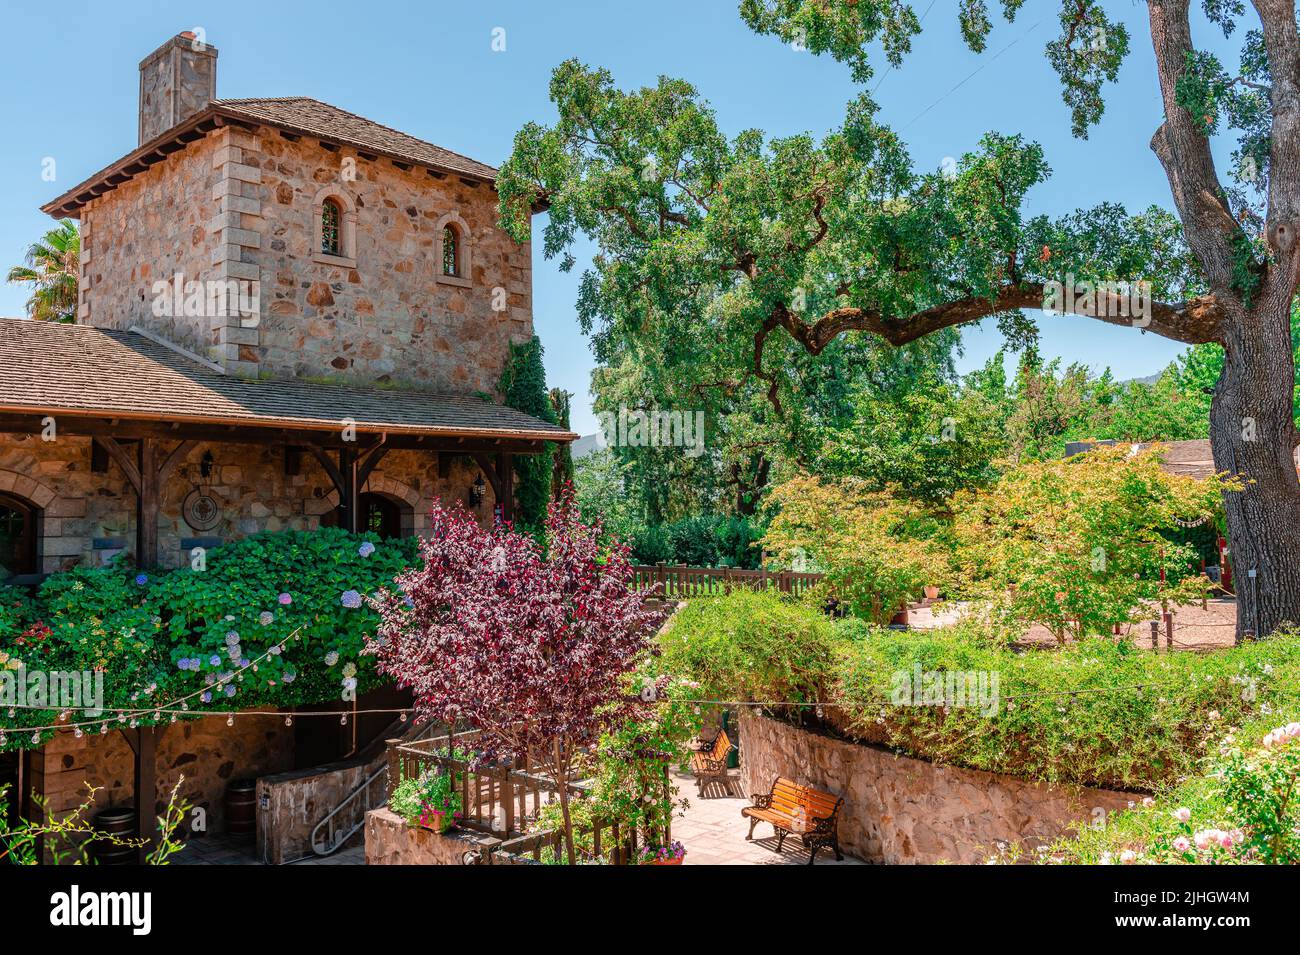 St. Helena, CA, USA - July 15 2015: The Sattui Winery in White Lane, one of the many wineries in Napa Valley. Stock Photo